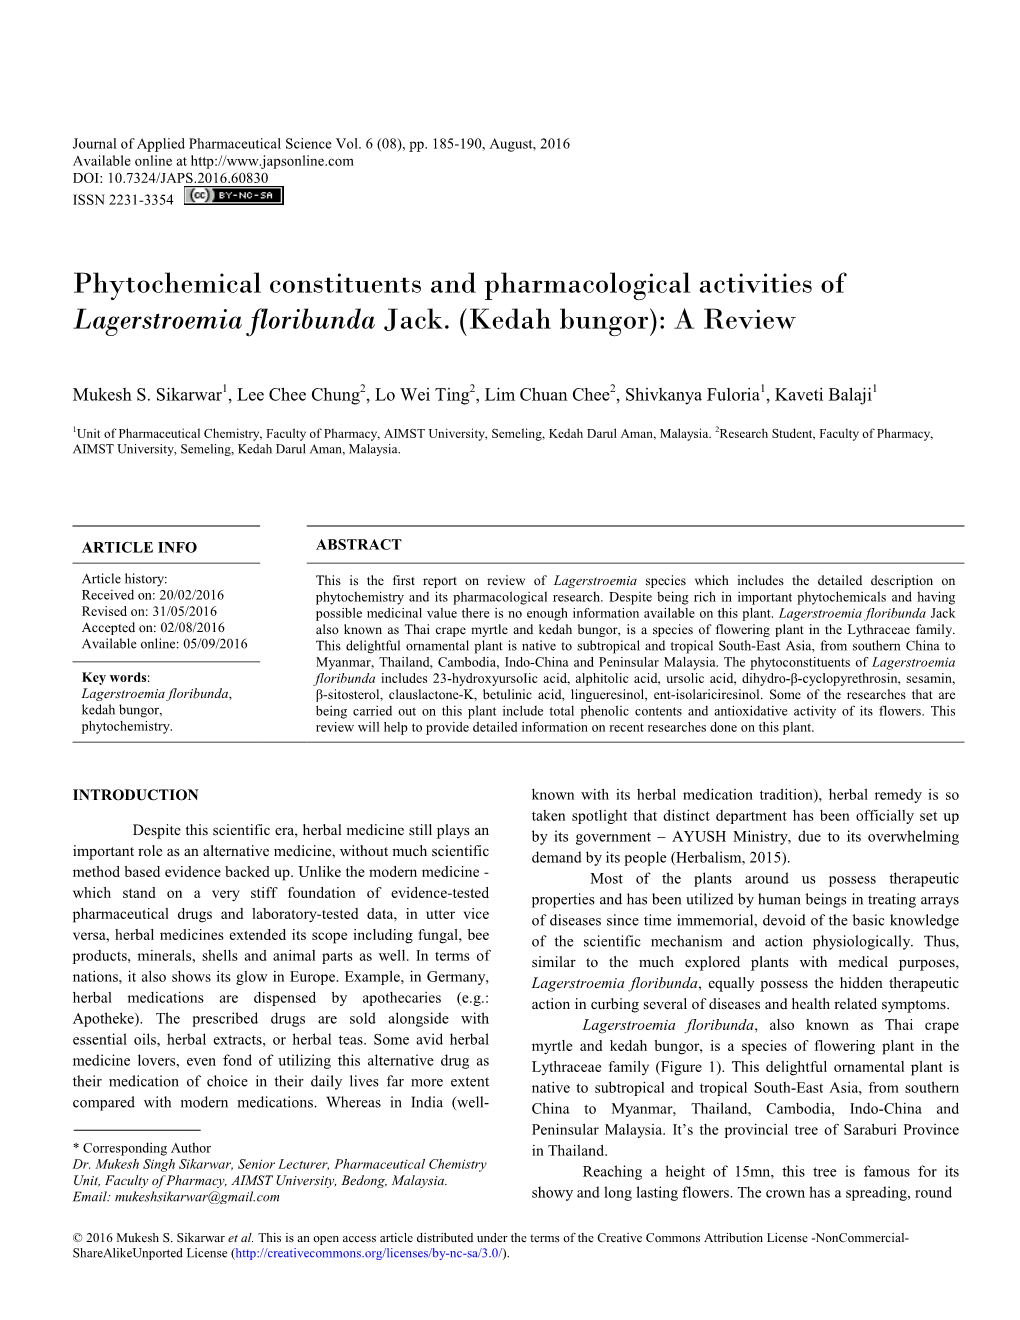 Phytochemical Constituents and Pharmacological Activities of Lagerstroemia Floribunda Jack